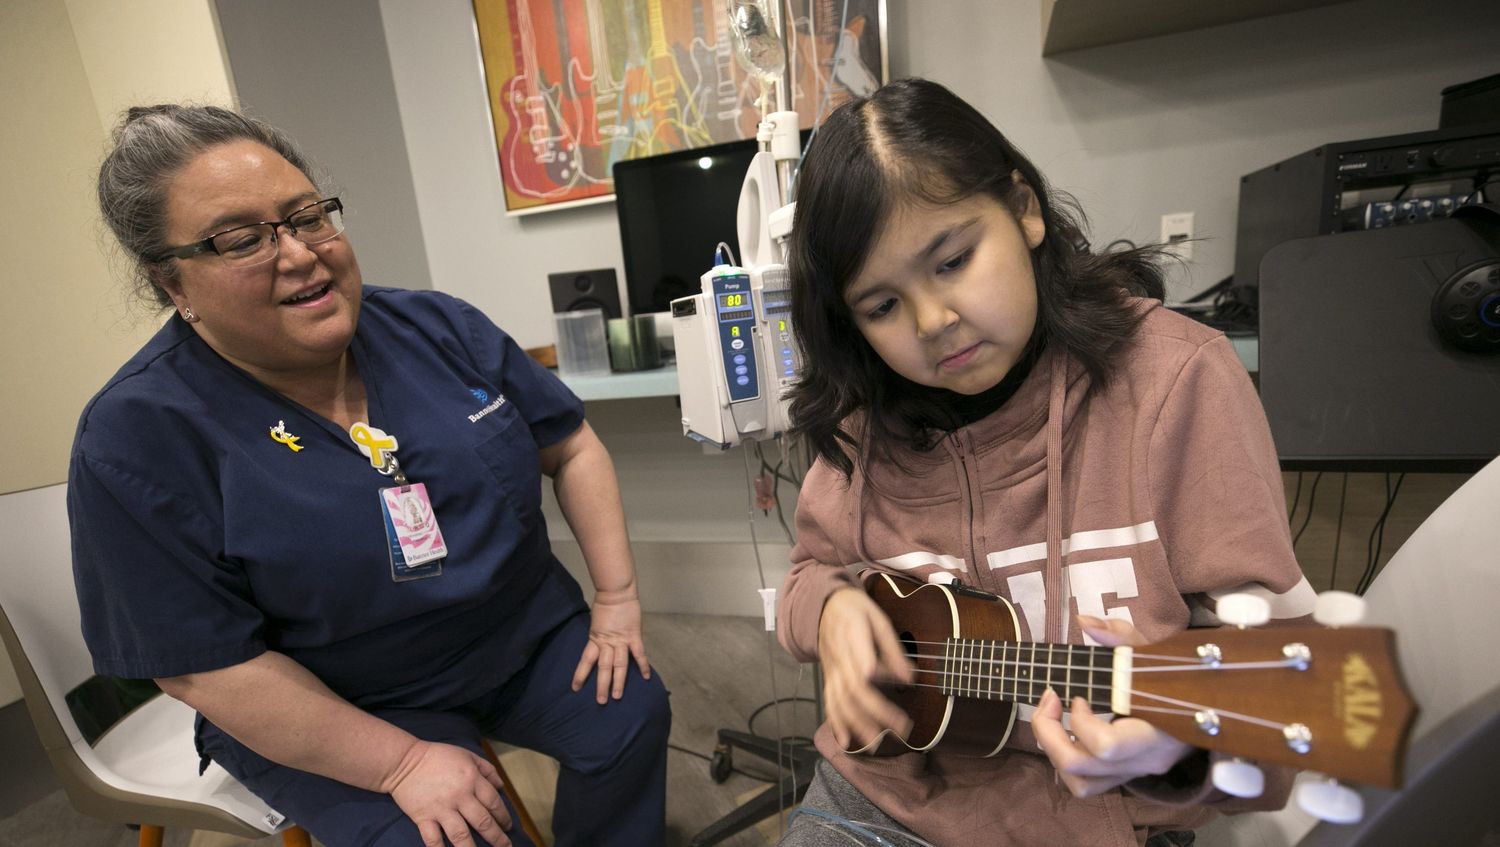 What Are Requirements To Major In Music Therapy At ASU